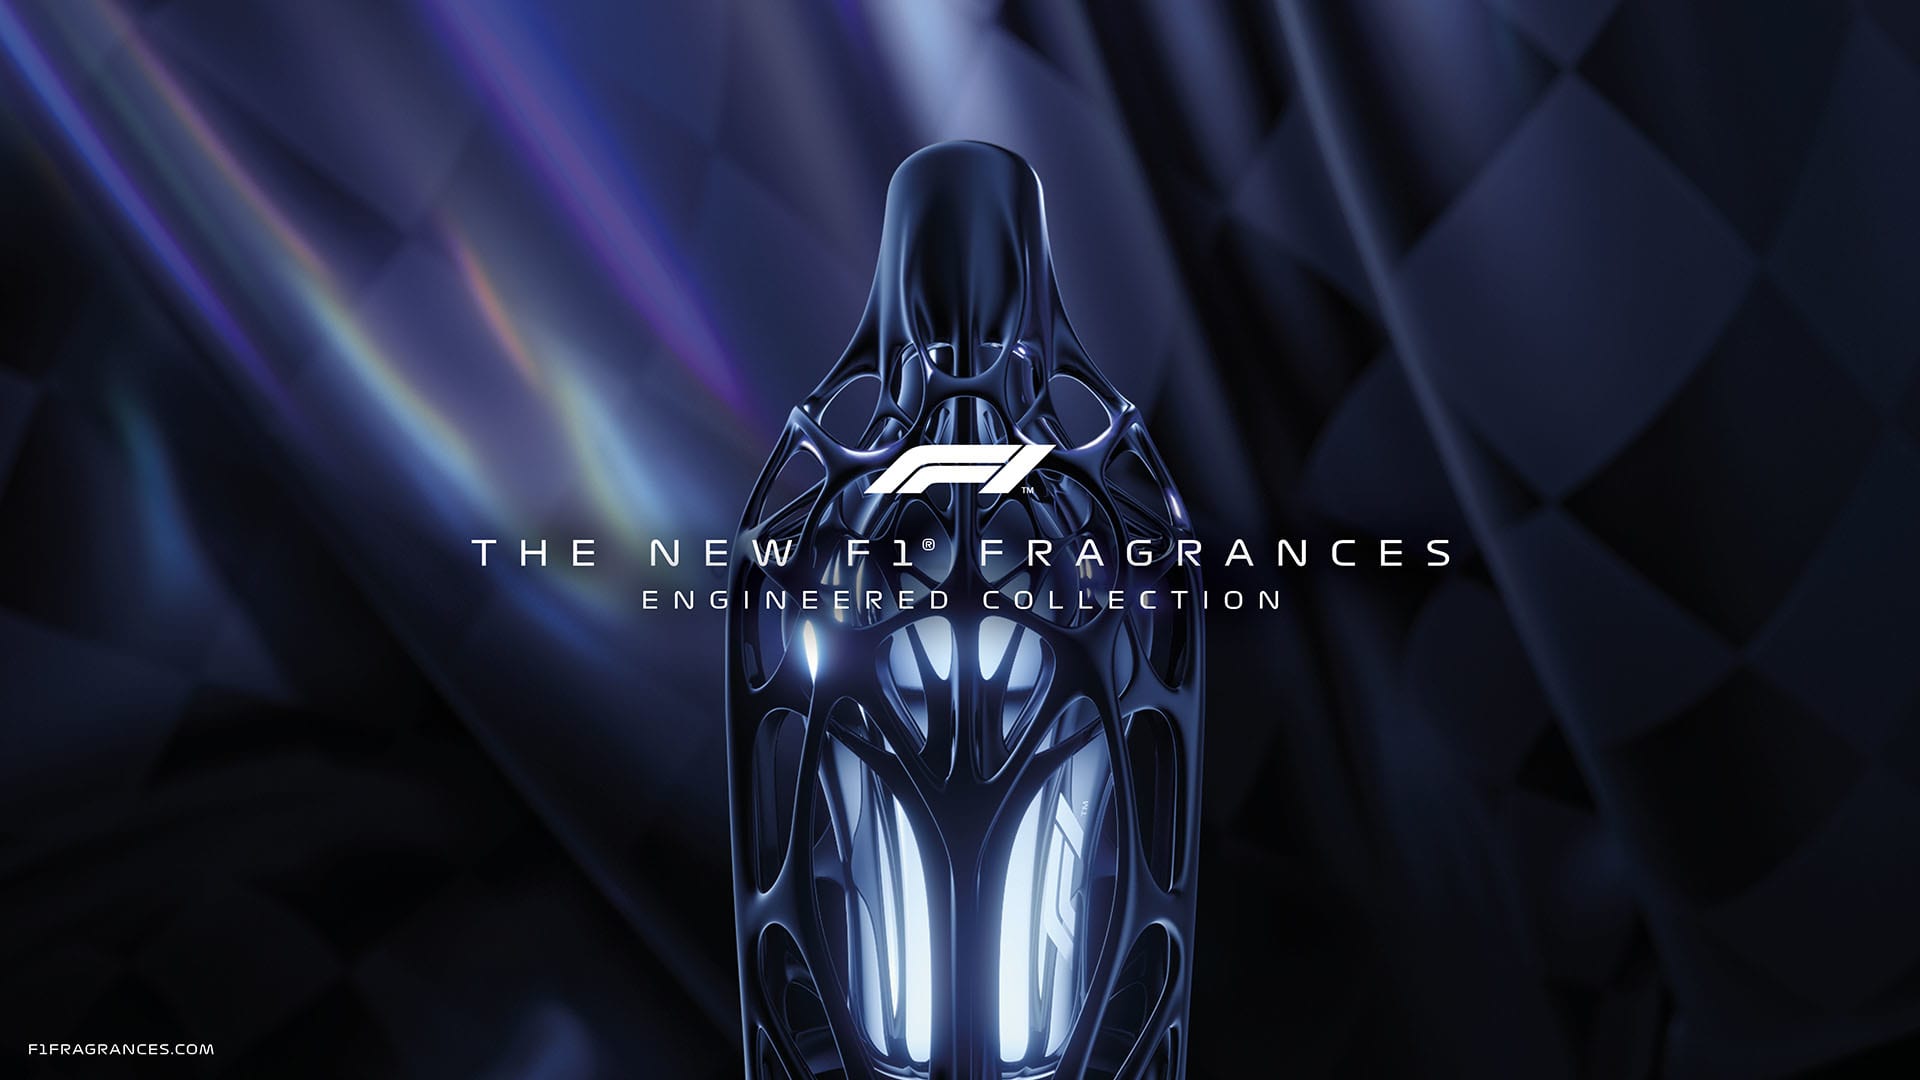 | 1® Collection first Formula F1 Engineered world features Fragrances